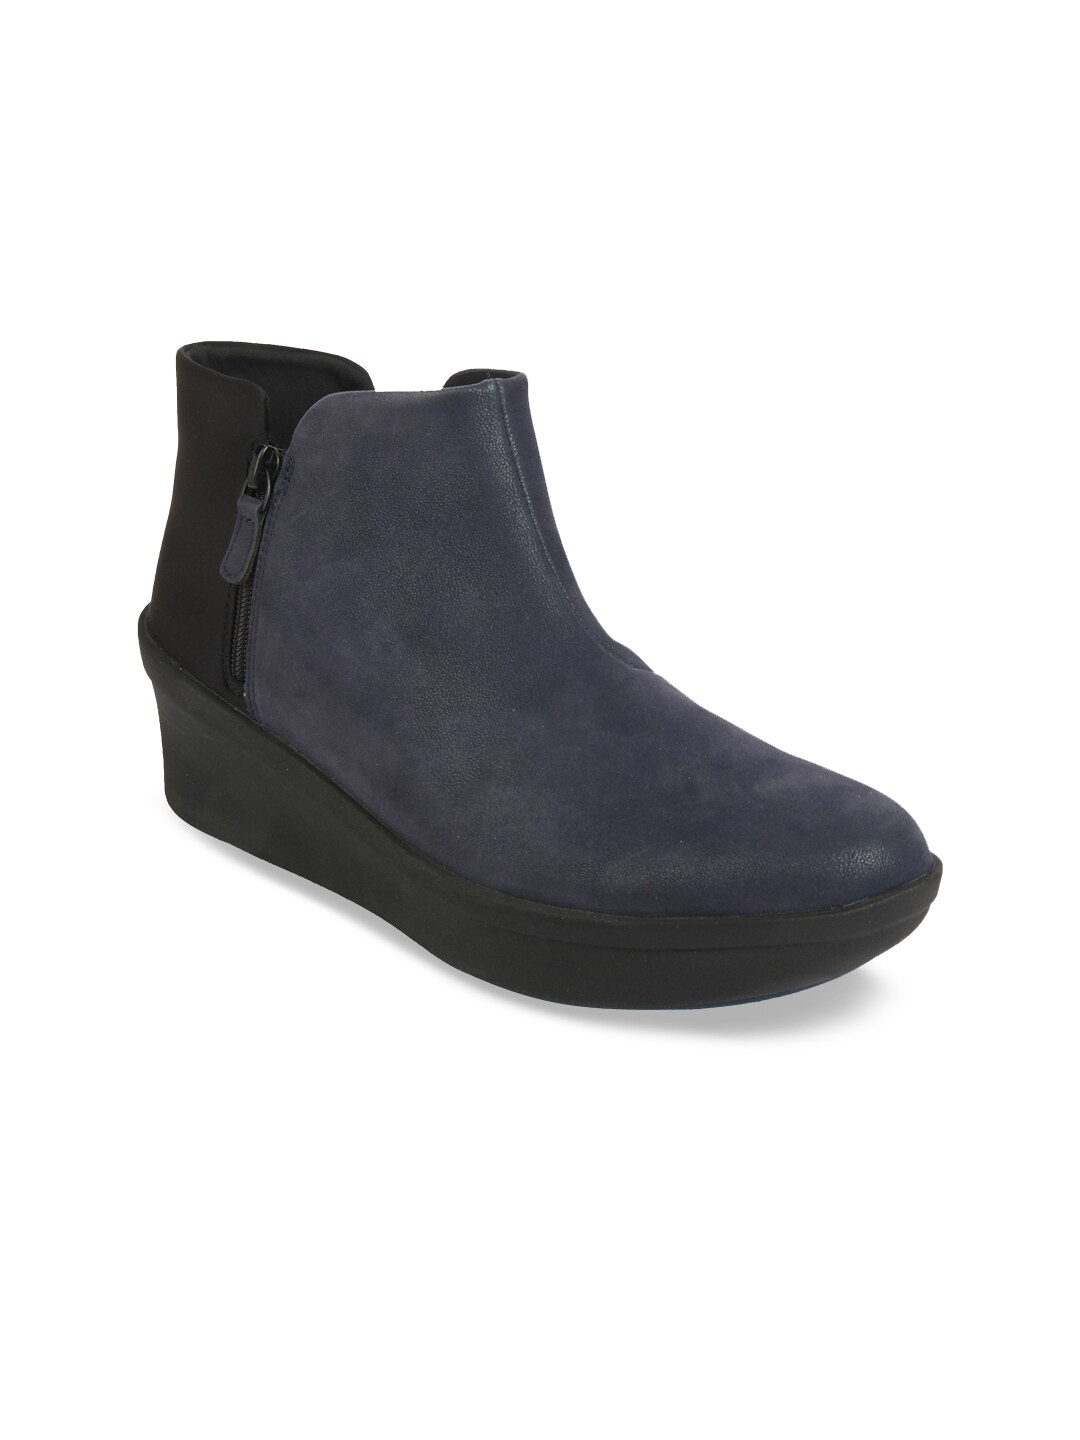 Clarks Women Navy Blue Solid Mid-Top Heeled Boots Price in India